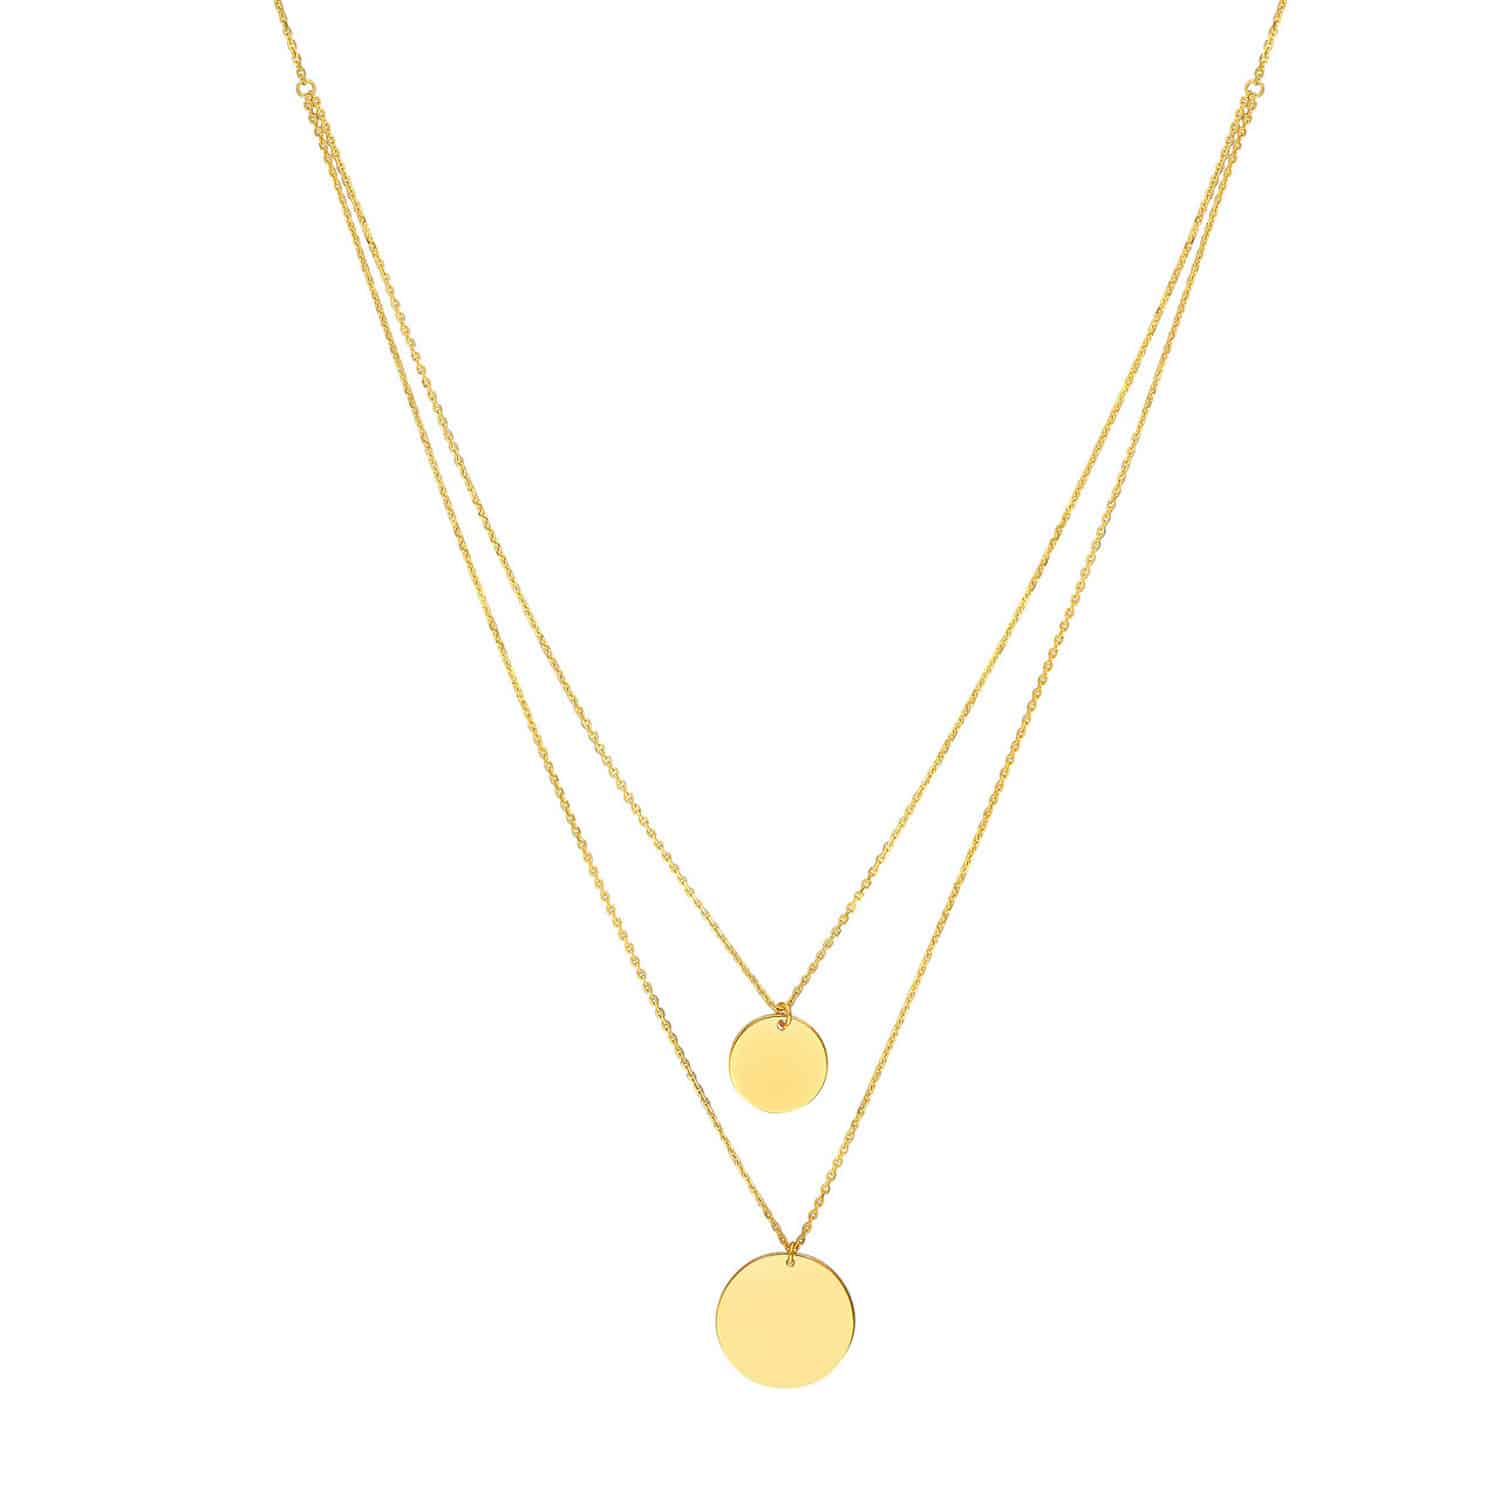 Engravable 14K Yellow Gold Round Personalized Pendant Double Necklace 16"-18"